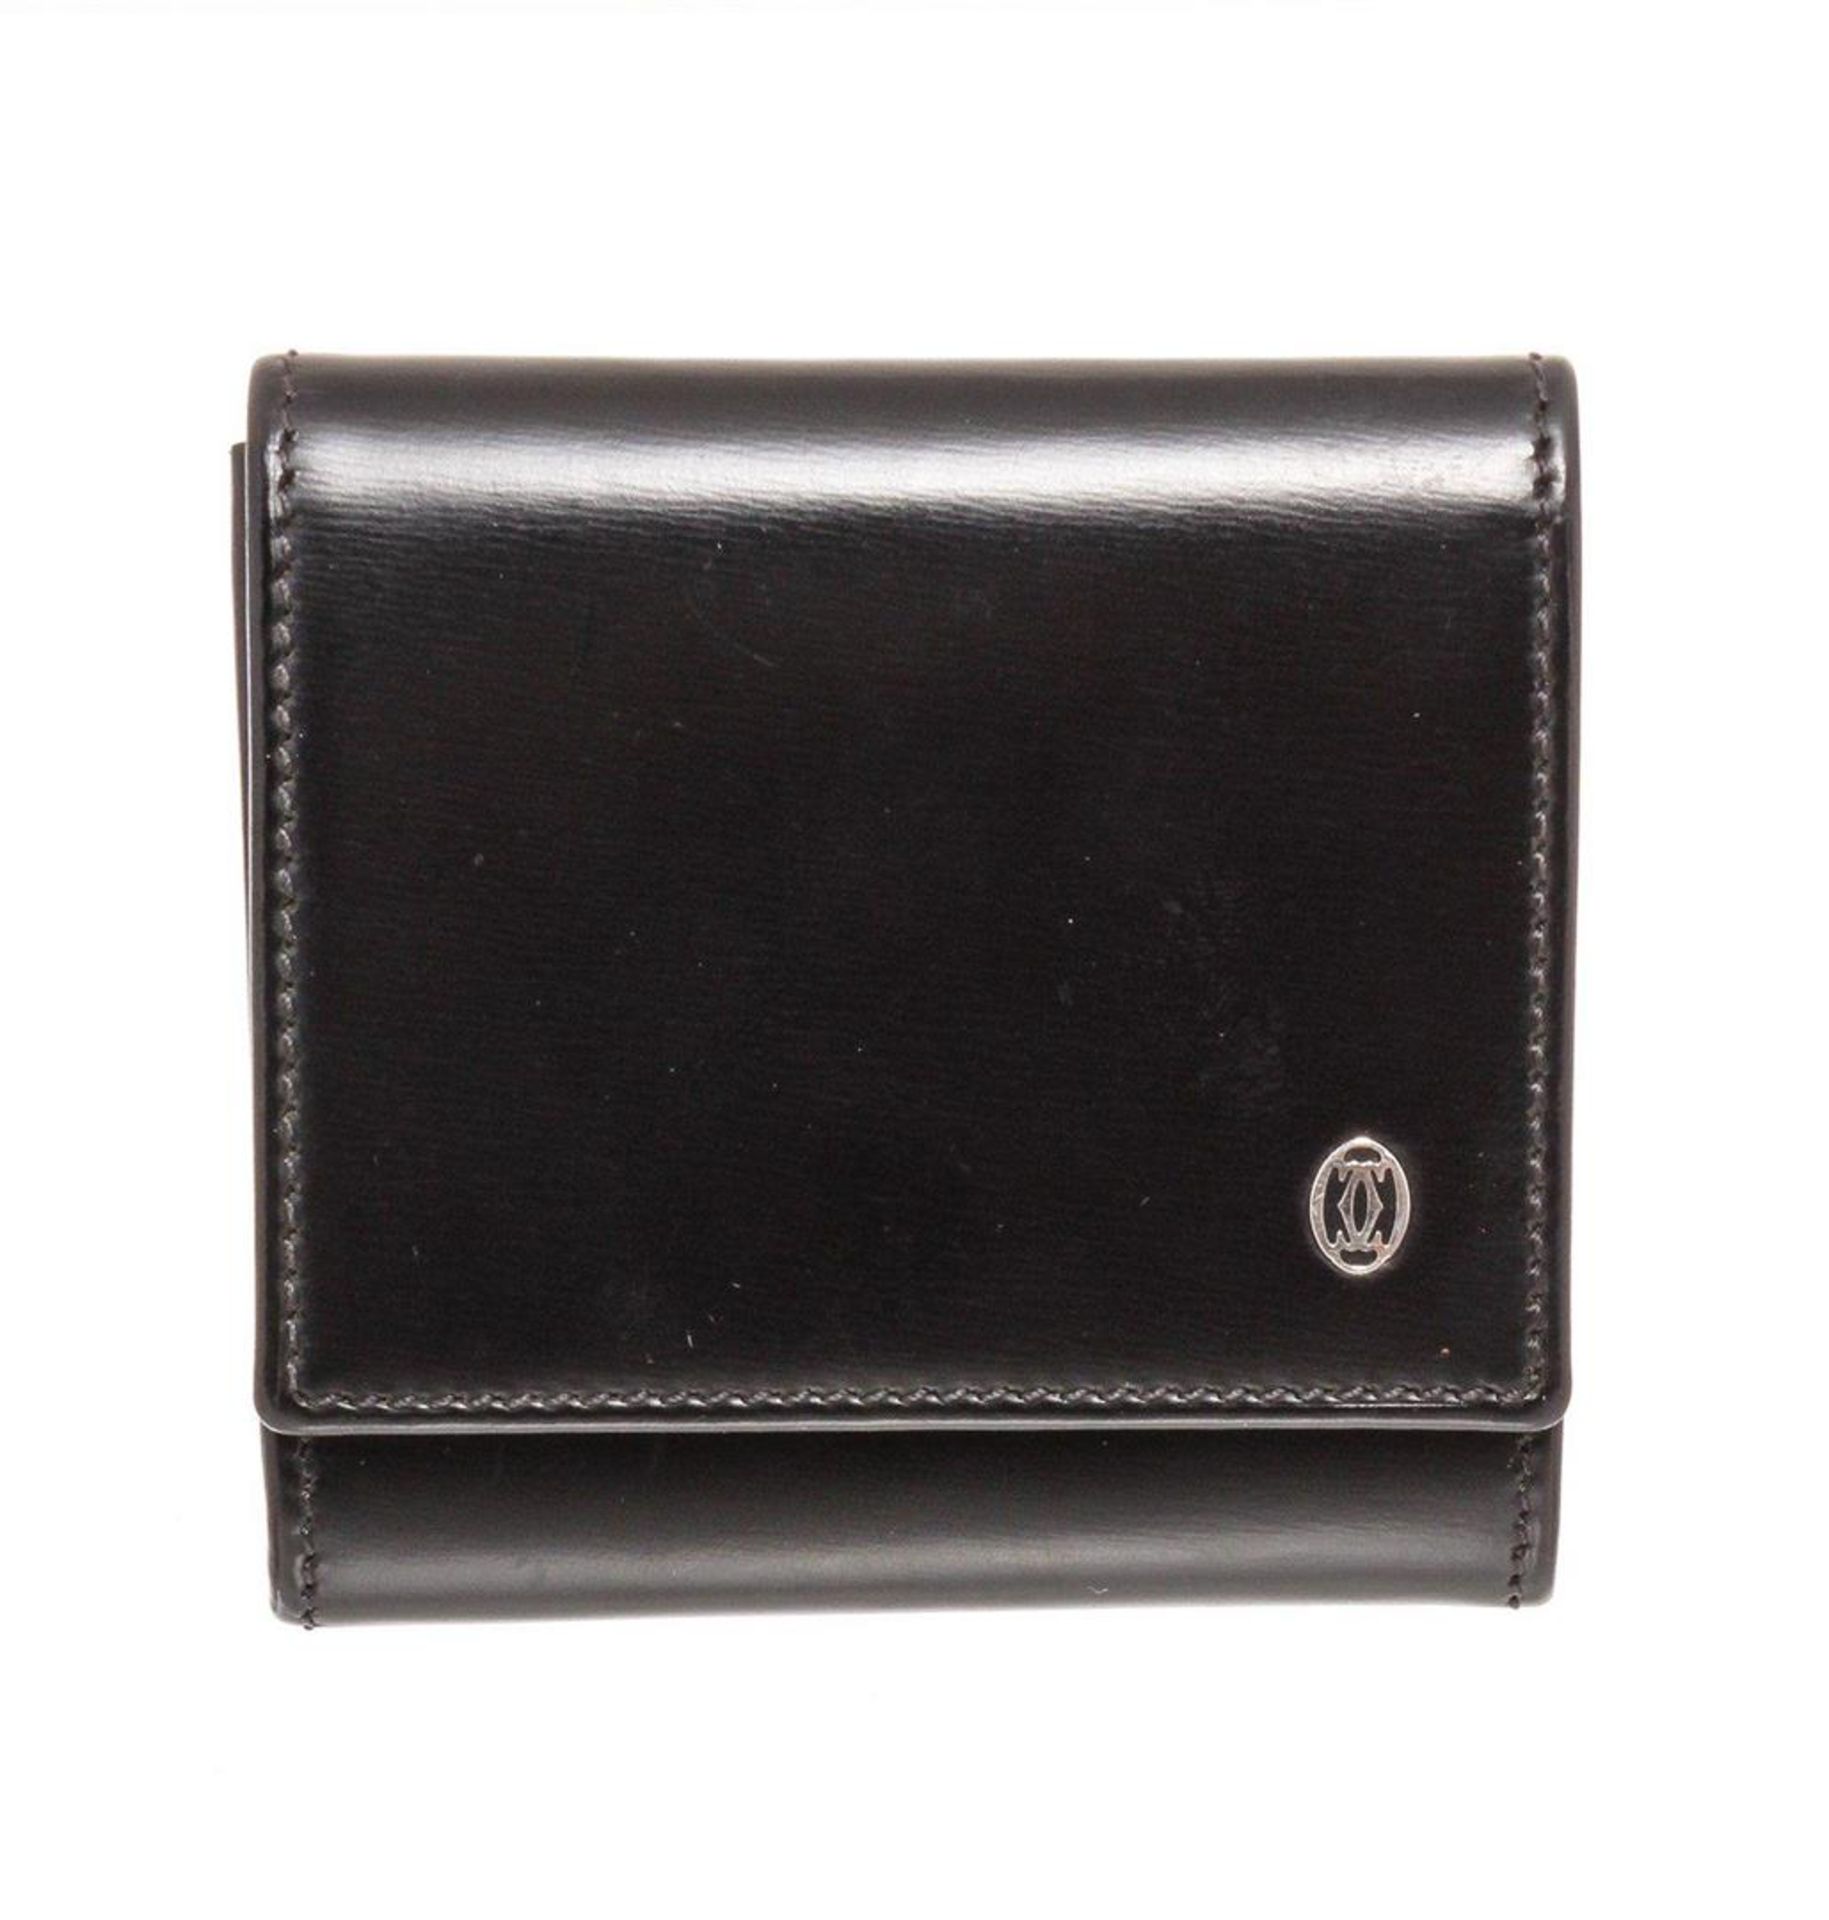 Cartier Black Leather Square Coin Purse Wallet